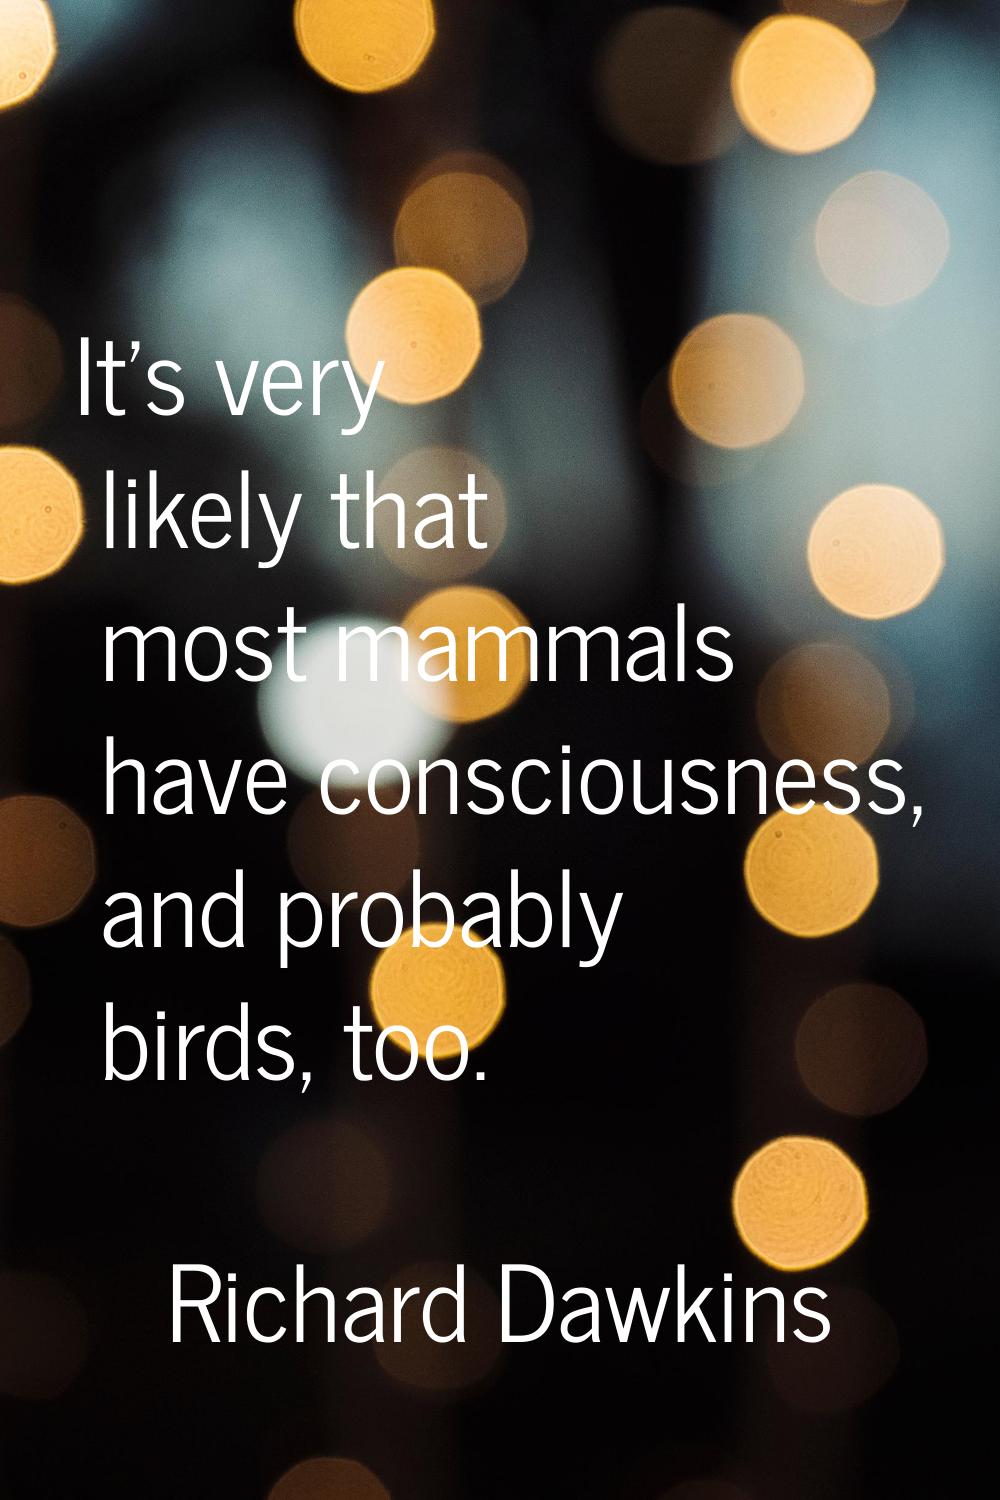 It's very likely that most mammals have consciousness, and probably birds, too.